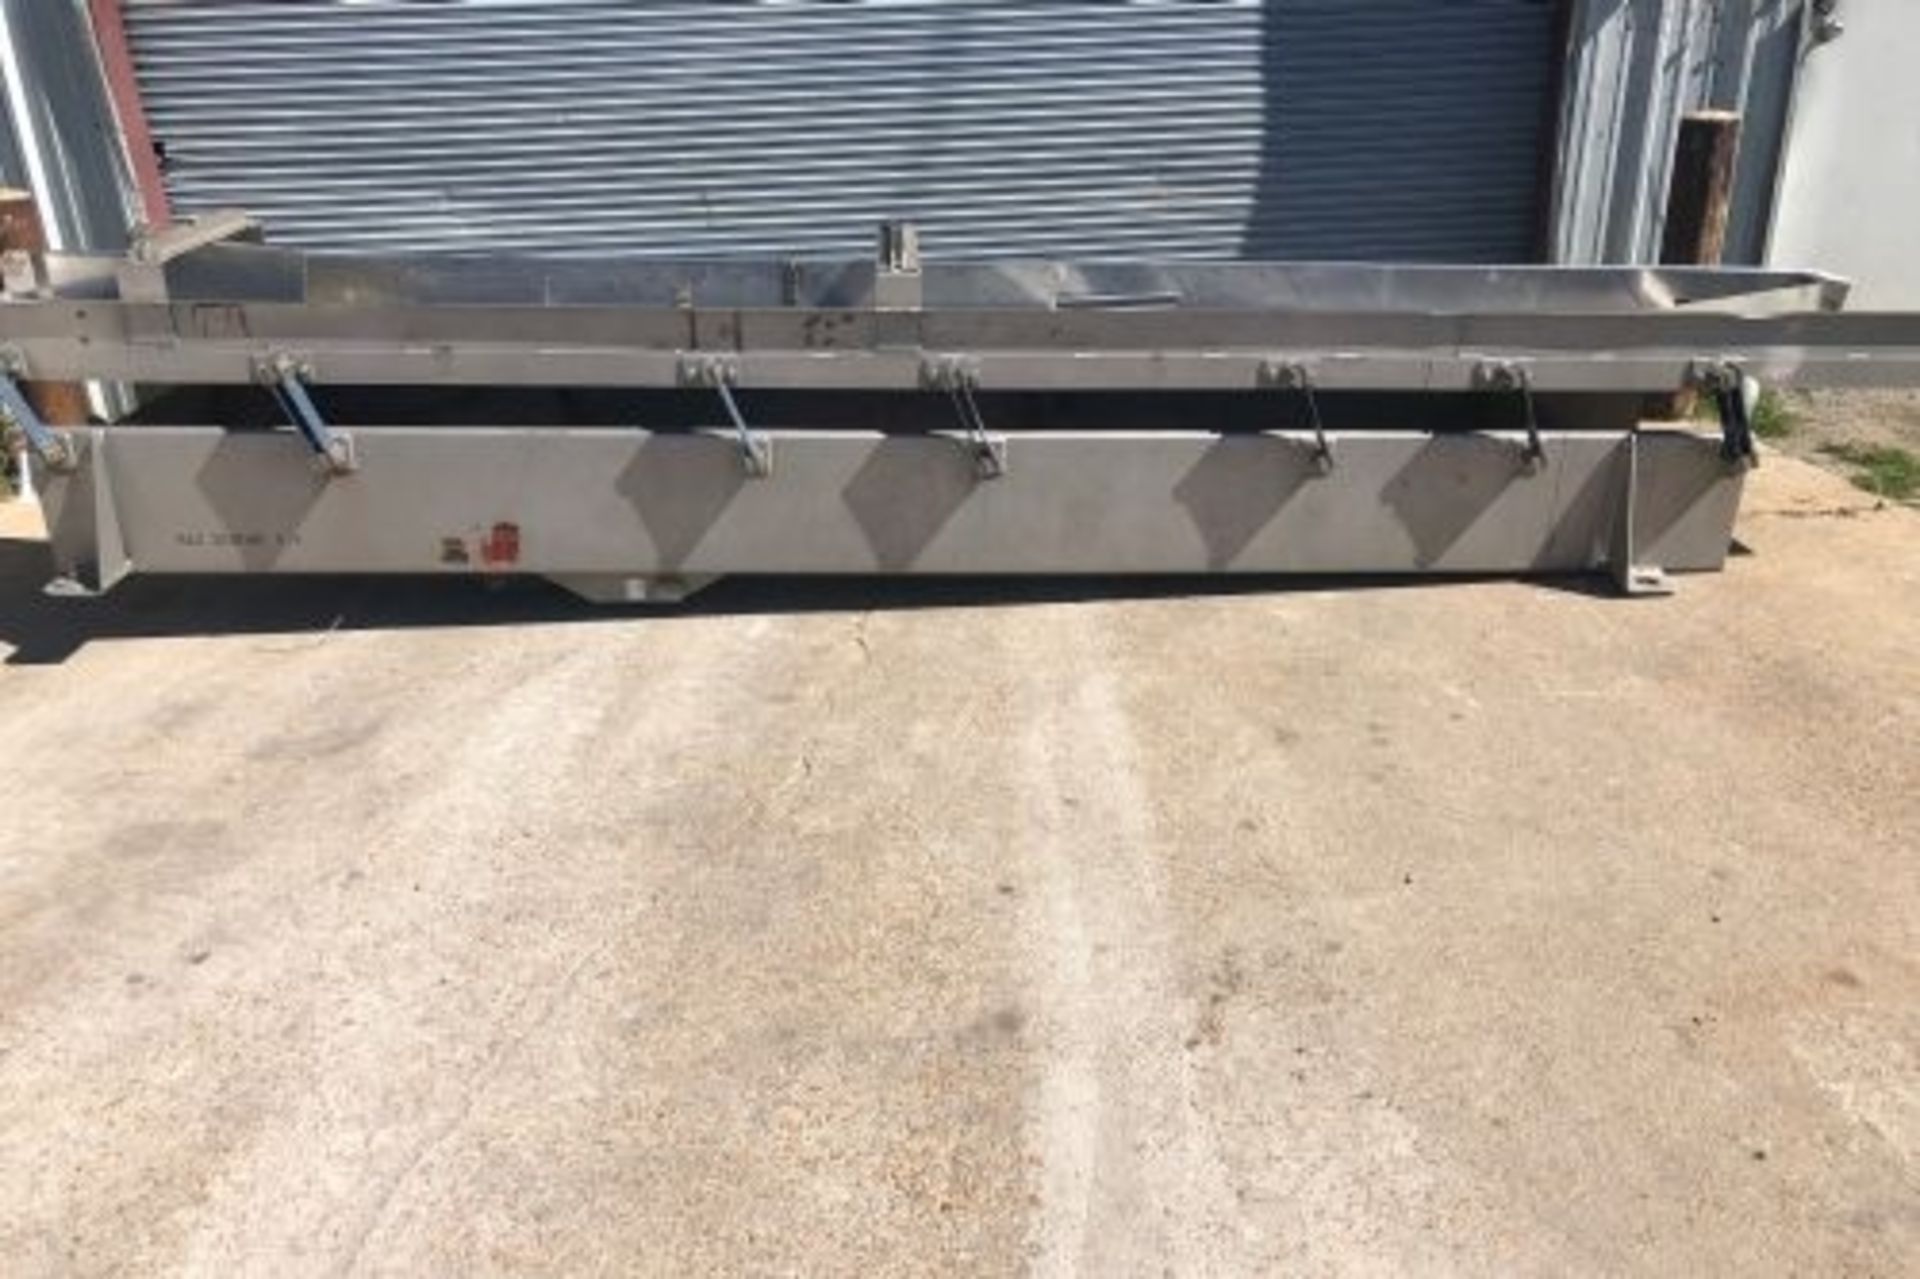 24" wide x 194" long Key Iso-Flo stainless steel distribution shaker - Image 2 of 4